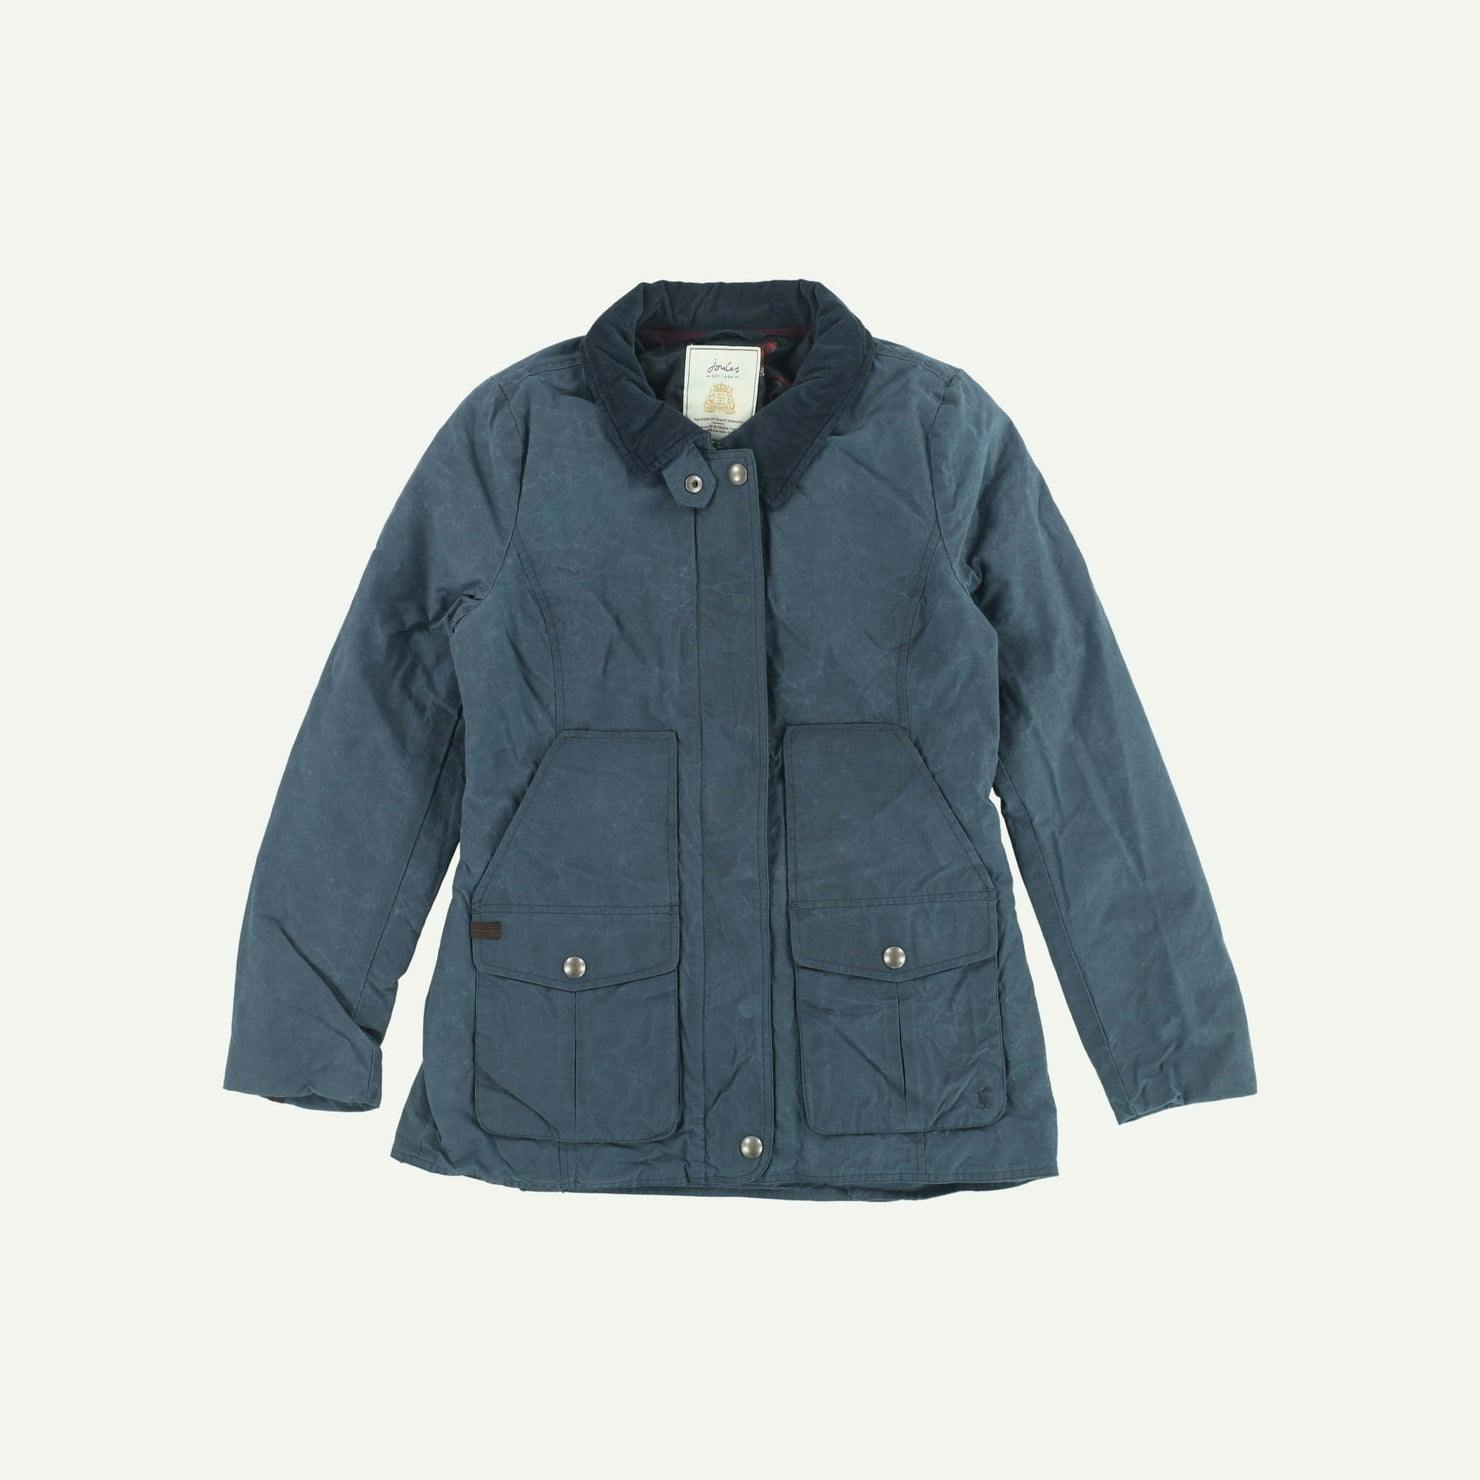 Joules As new Navy Jacket